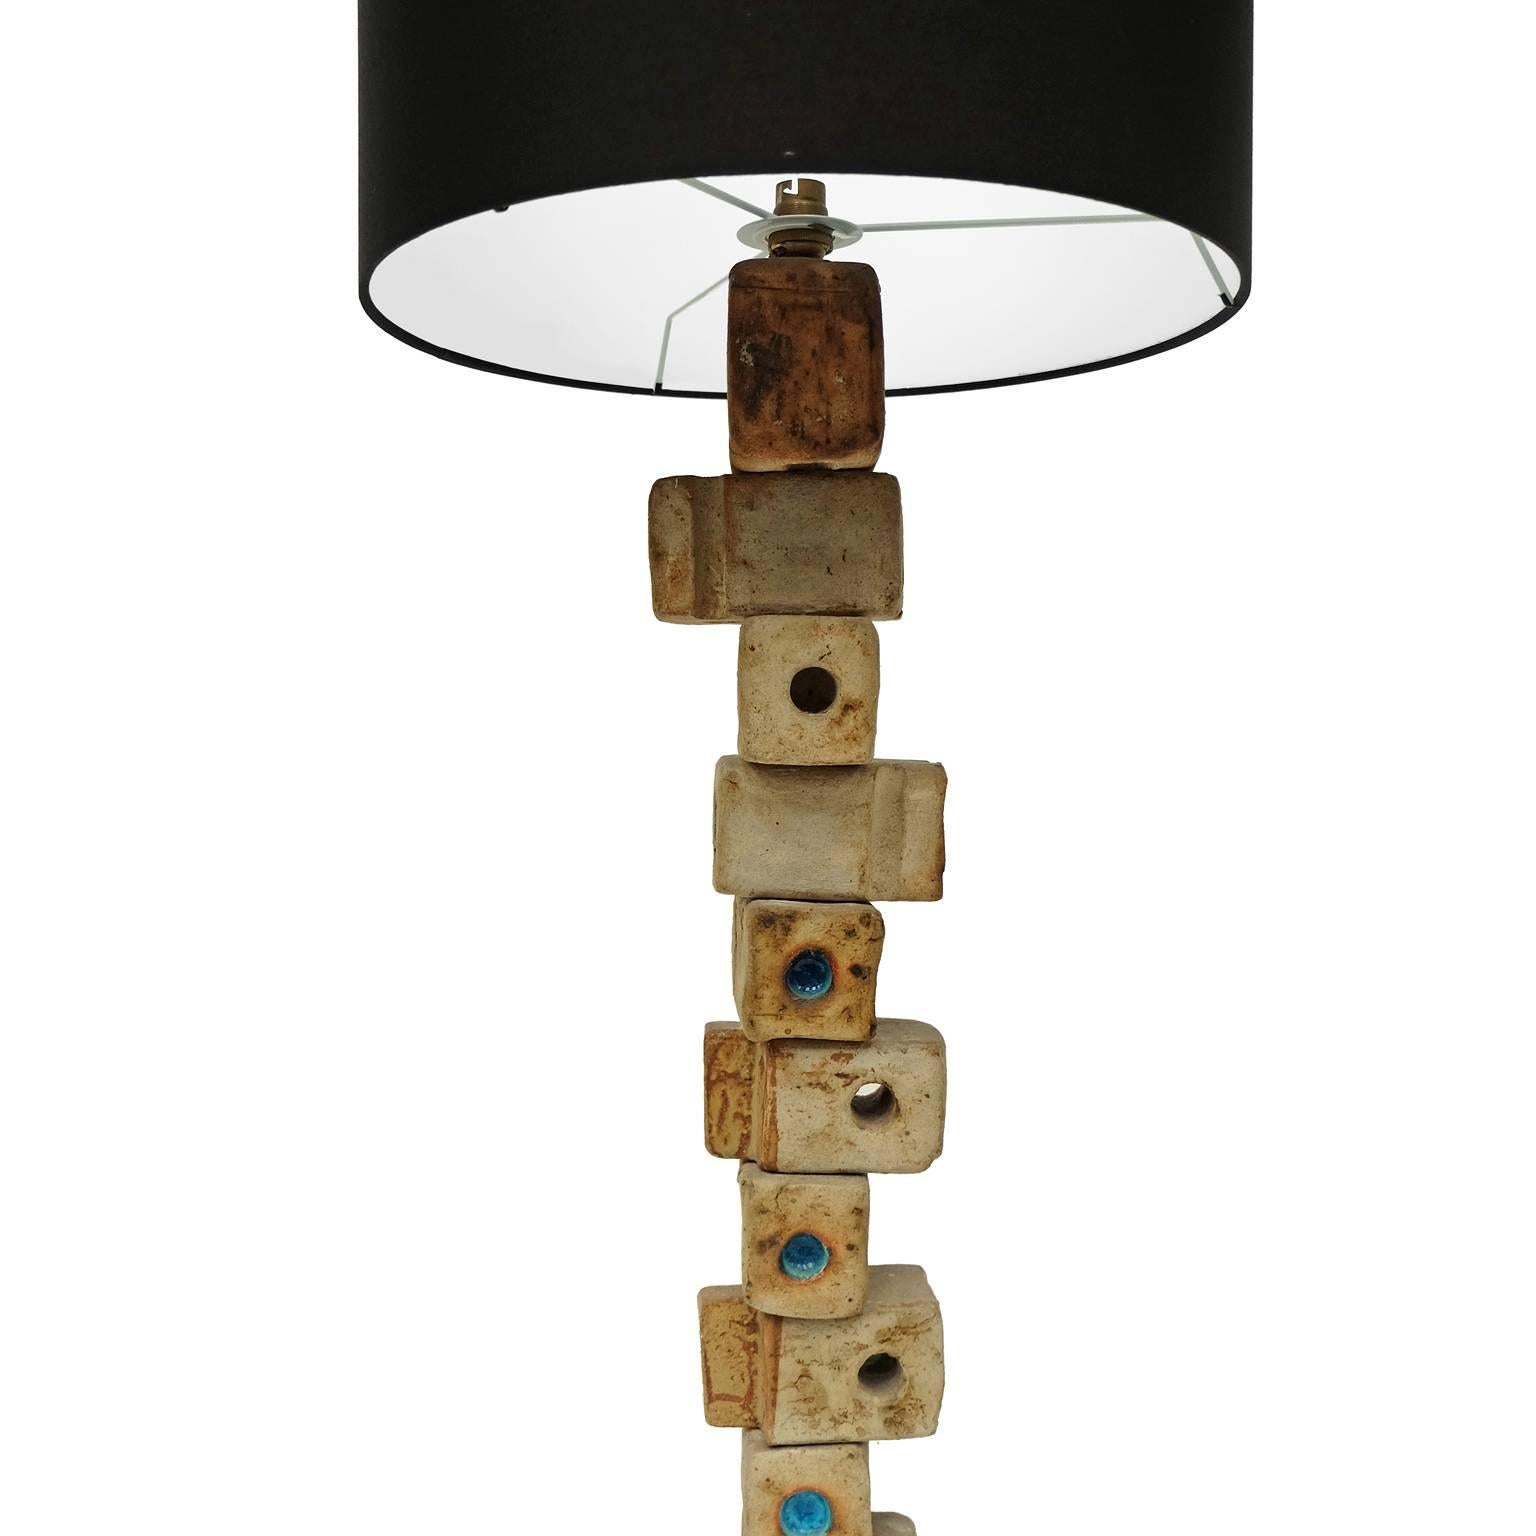 1960s TOTEM floor lamp designed and manufactured by Bernard Rooke, UK.

Stacked handmade ceramic block design with blue glazed detail.

Black cotton shade.

Measures: 
With shade: H 118cm x L 41cm x W 41cm.
Without shade: H 98cm x W 16cm x D